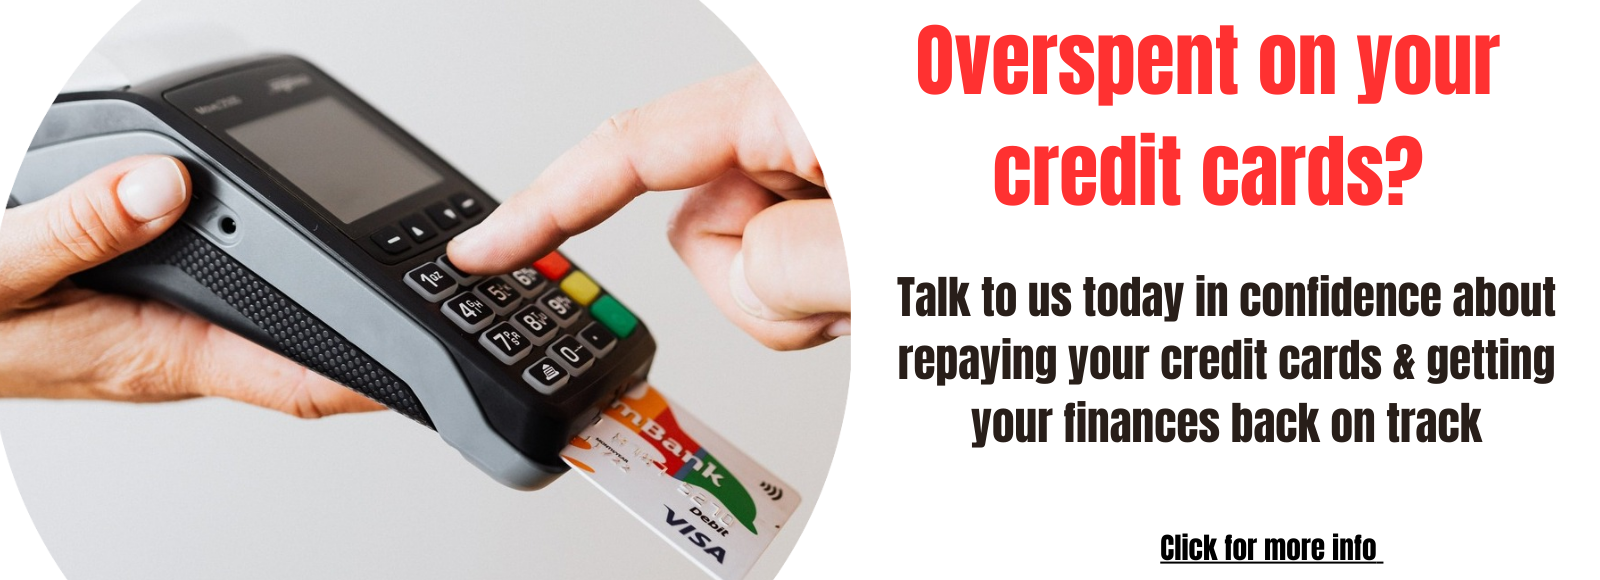 Blackrock Credit Union image for promoting repay credit cards with terminal & credit card